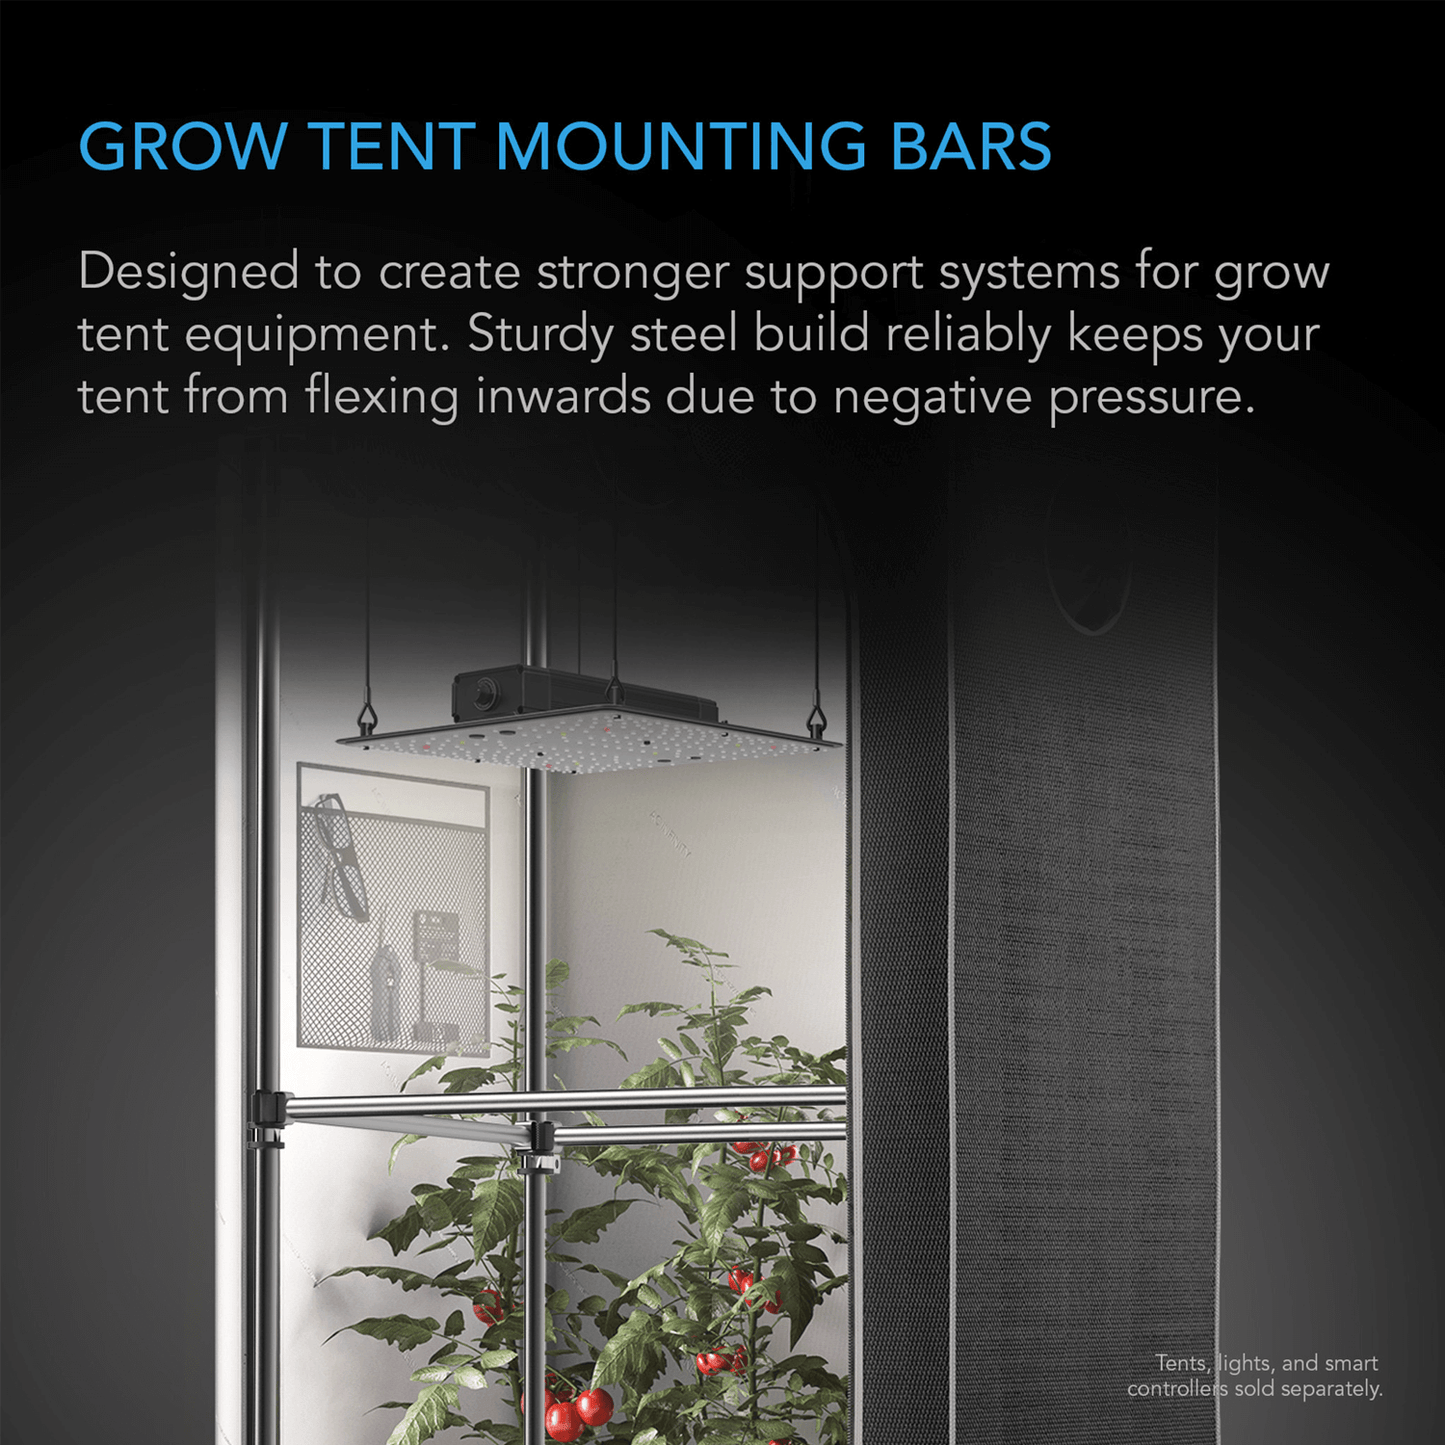 AC Infinity Grow Tent Mounting Bars, for Indoor Grow Spaces, 4x4' AC-HCA44 Grow Tents